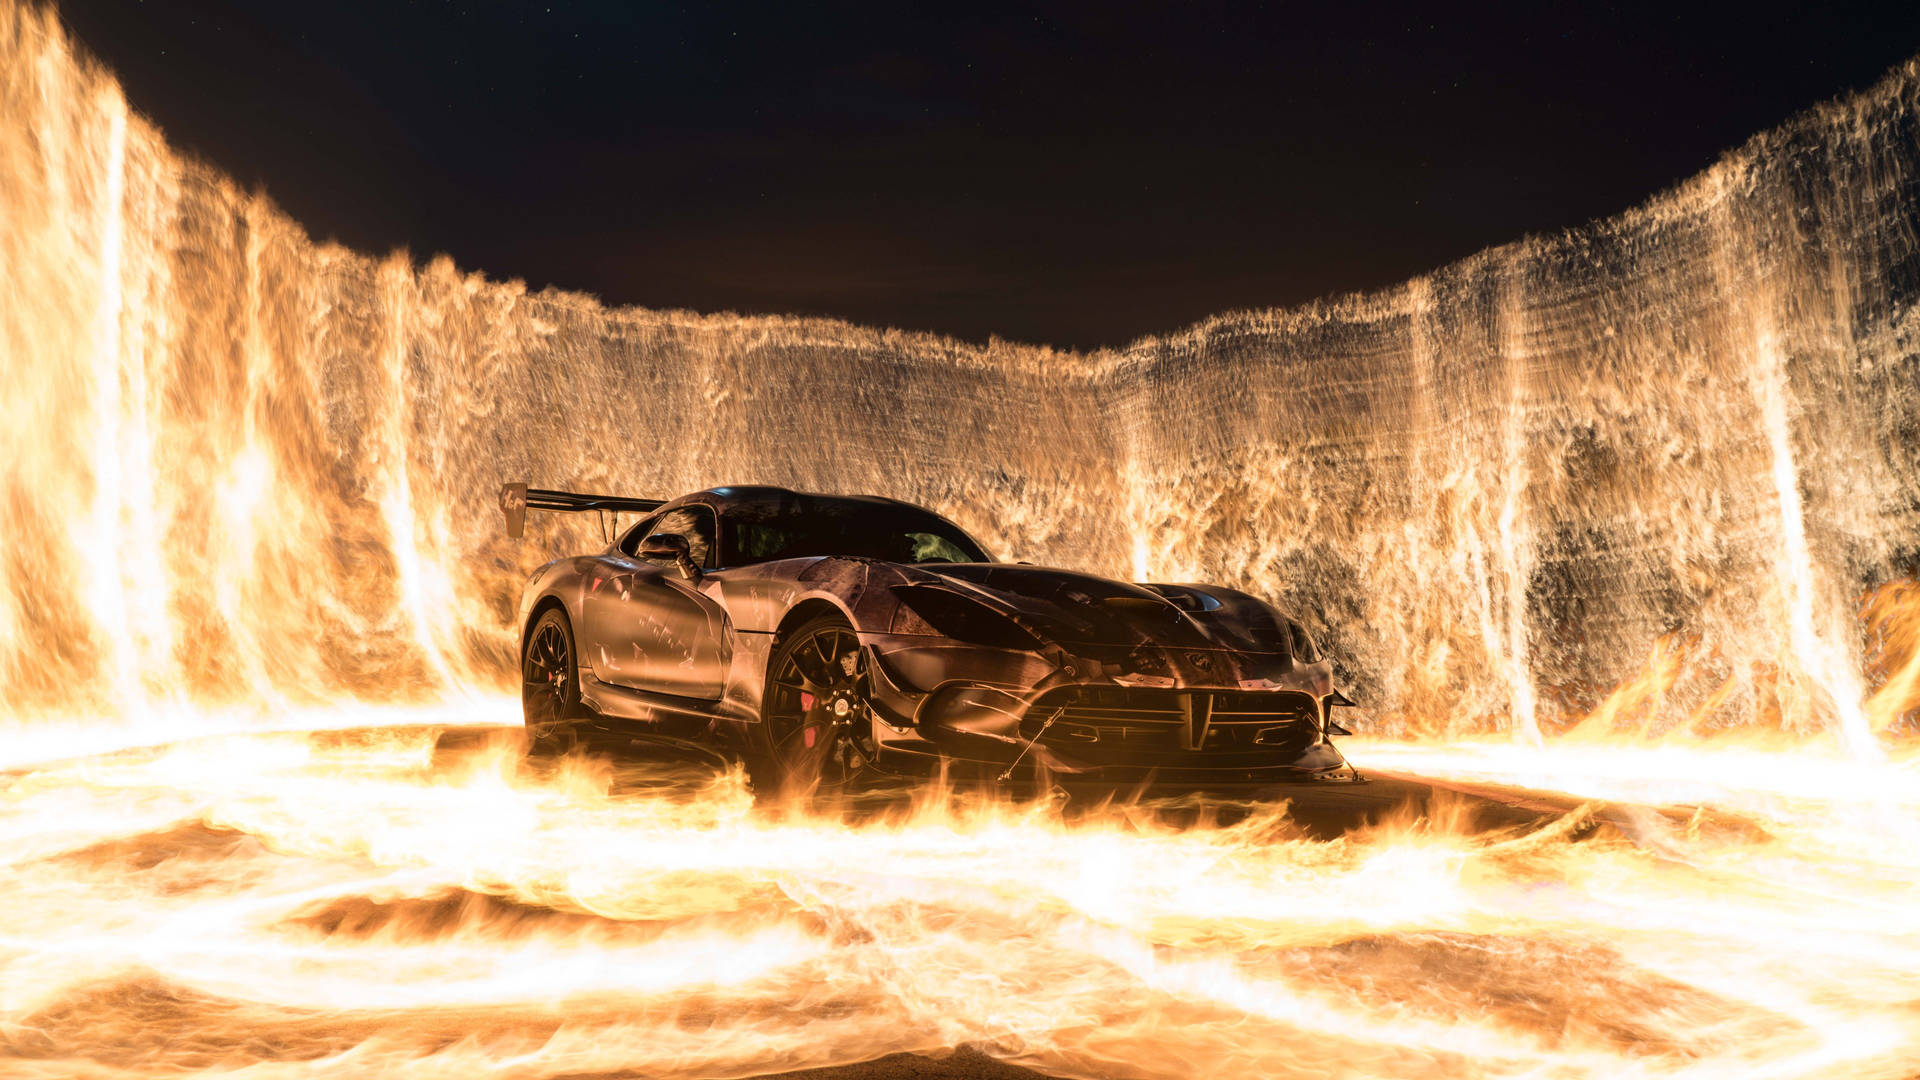 Fire Car In Wall Of Flames Background